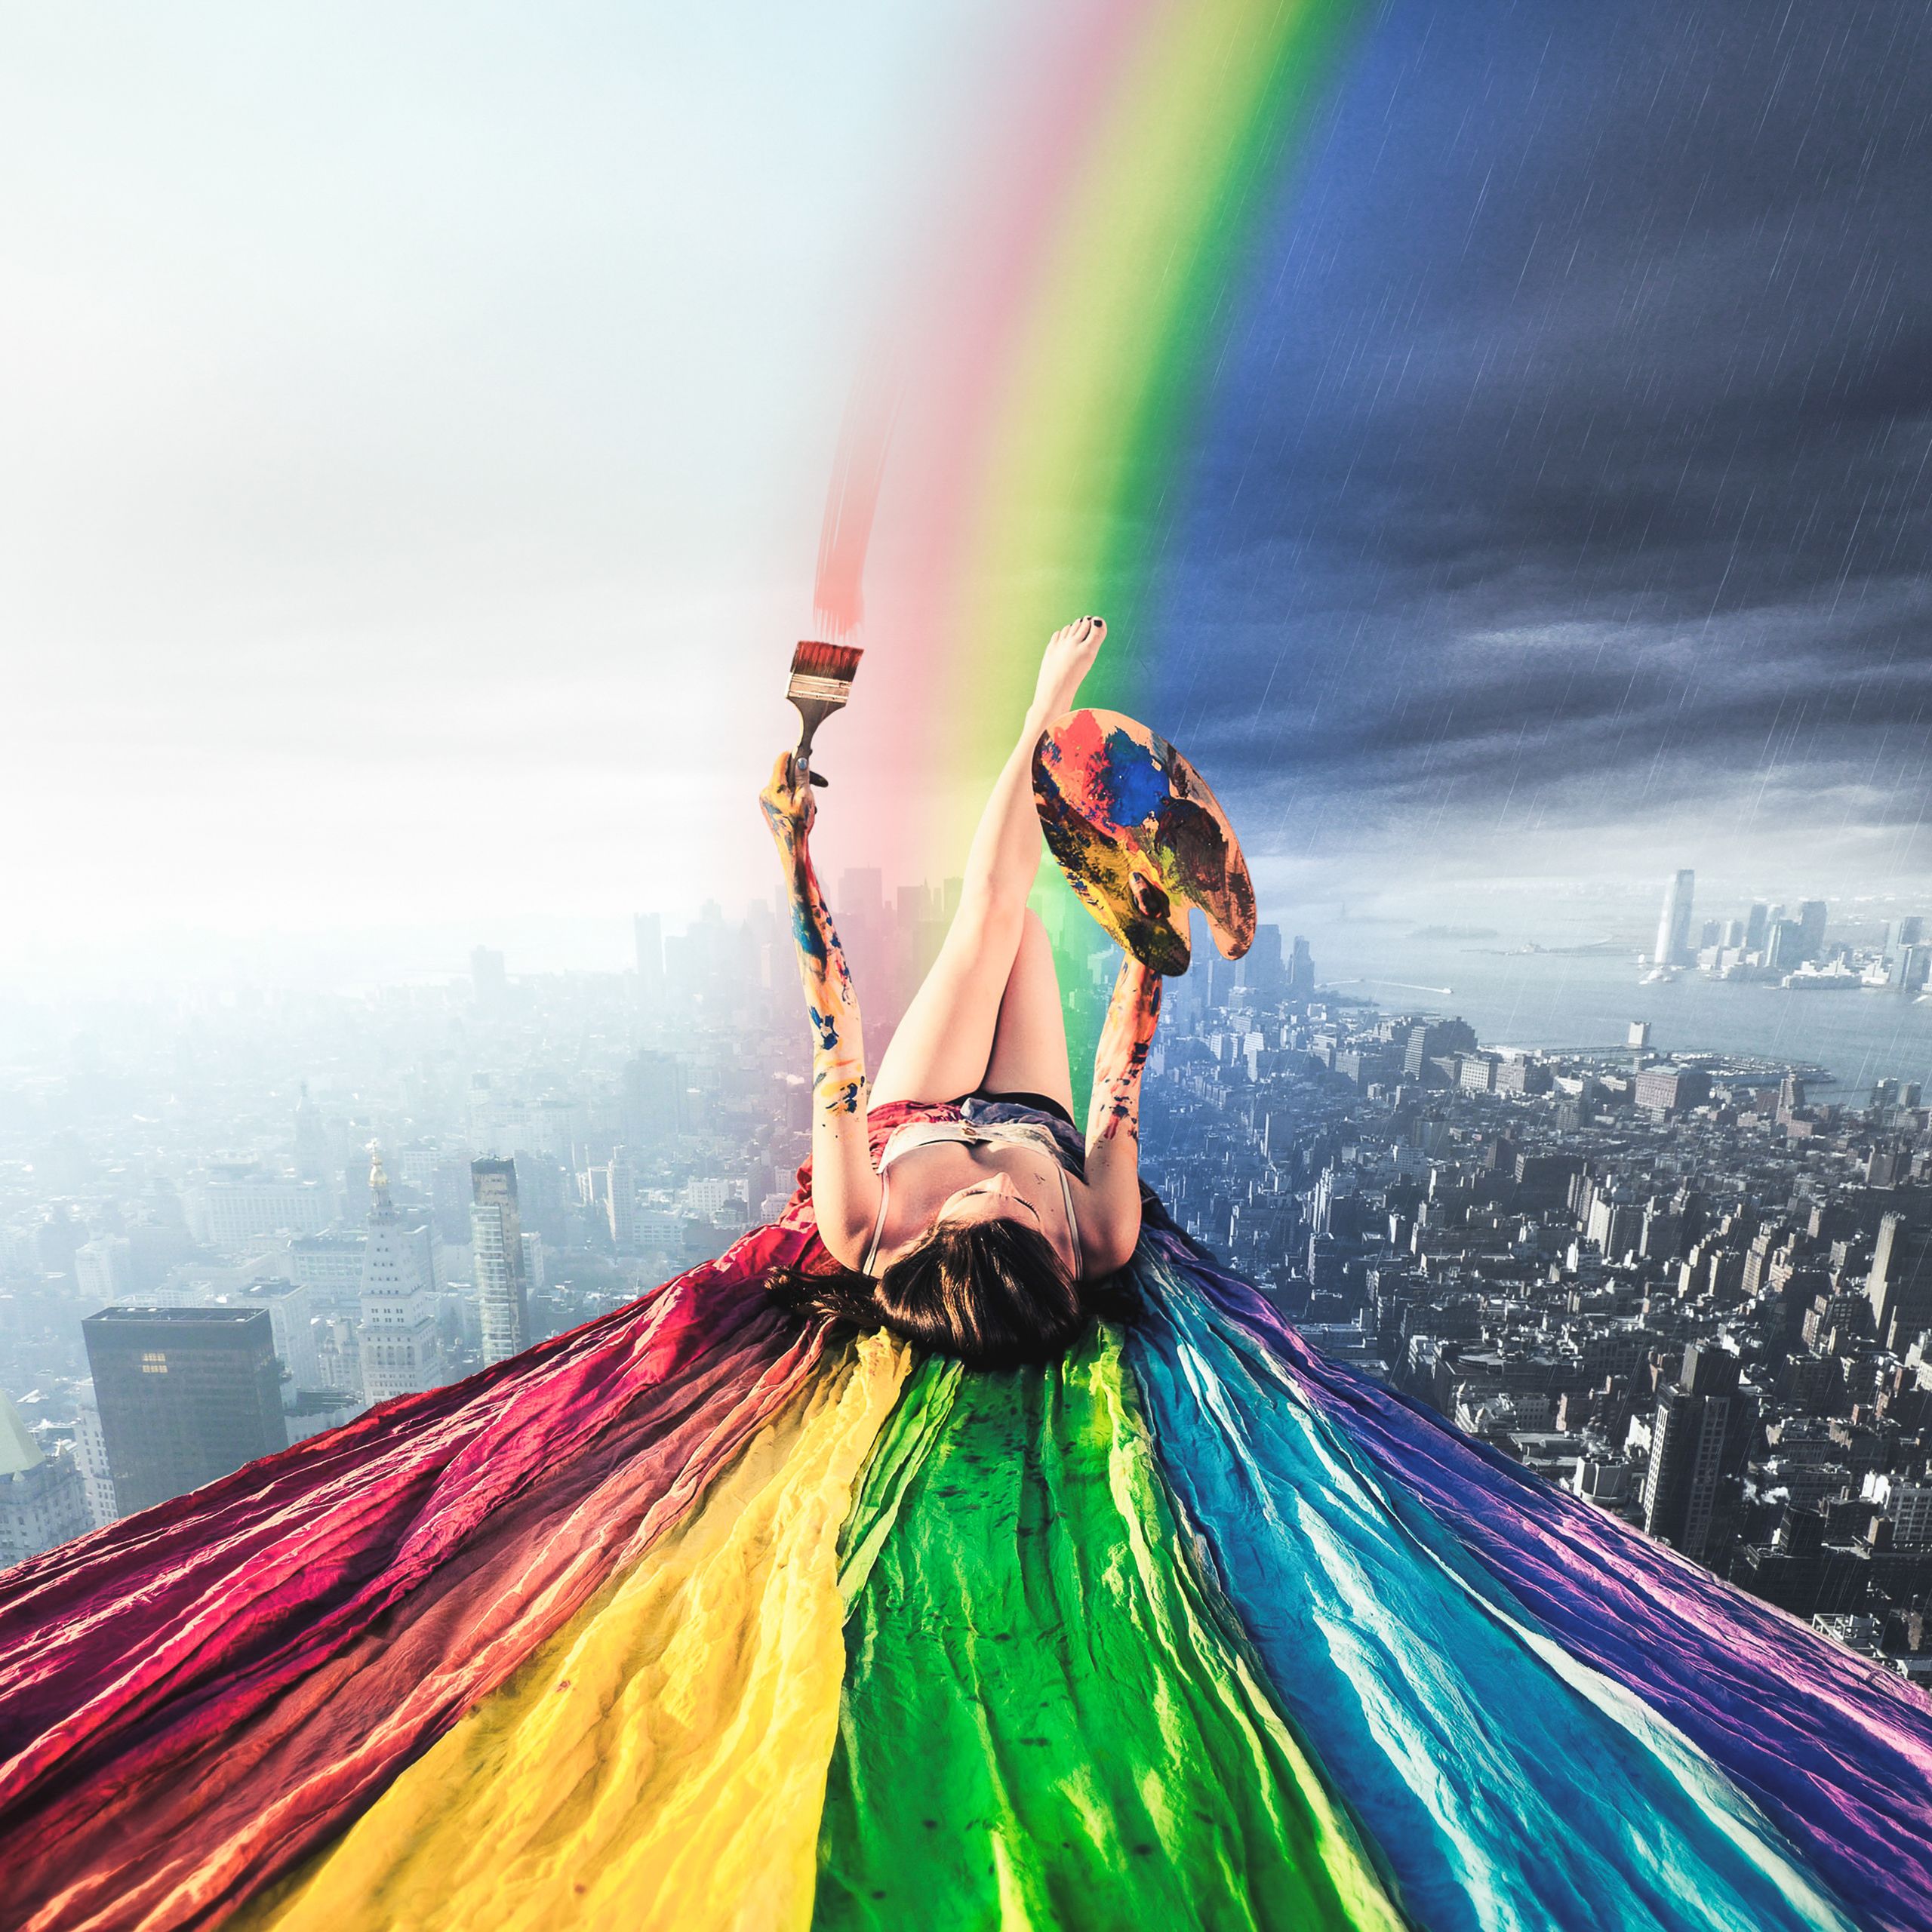 Wallpaper Rainbow, Girl, Paint, Cityscape, Surreal, Dream, HD, Fantasy,. Wallpaper for iPhone, Android, Mobile and Desktop